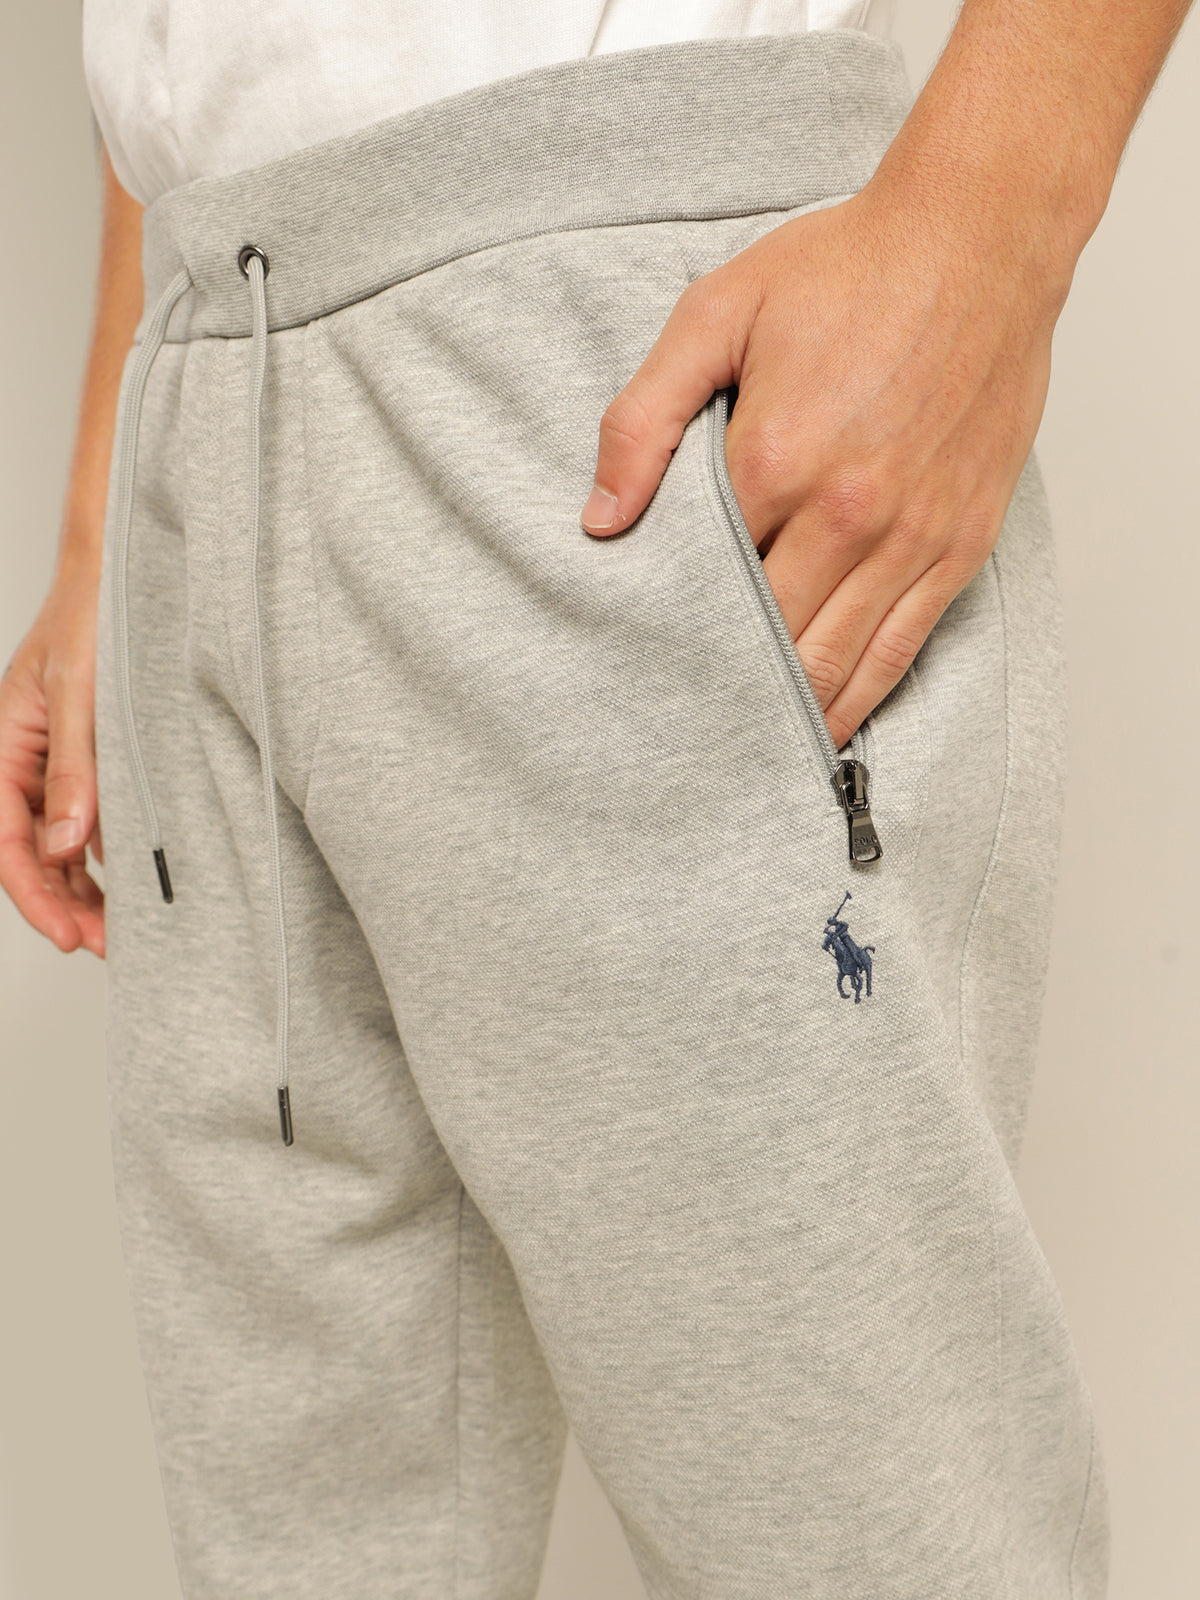 Polo Double Knit Jogger Pant in Grey